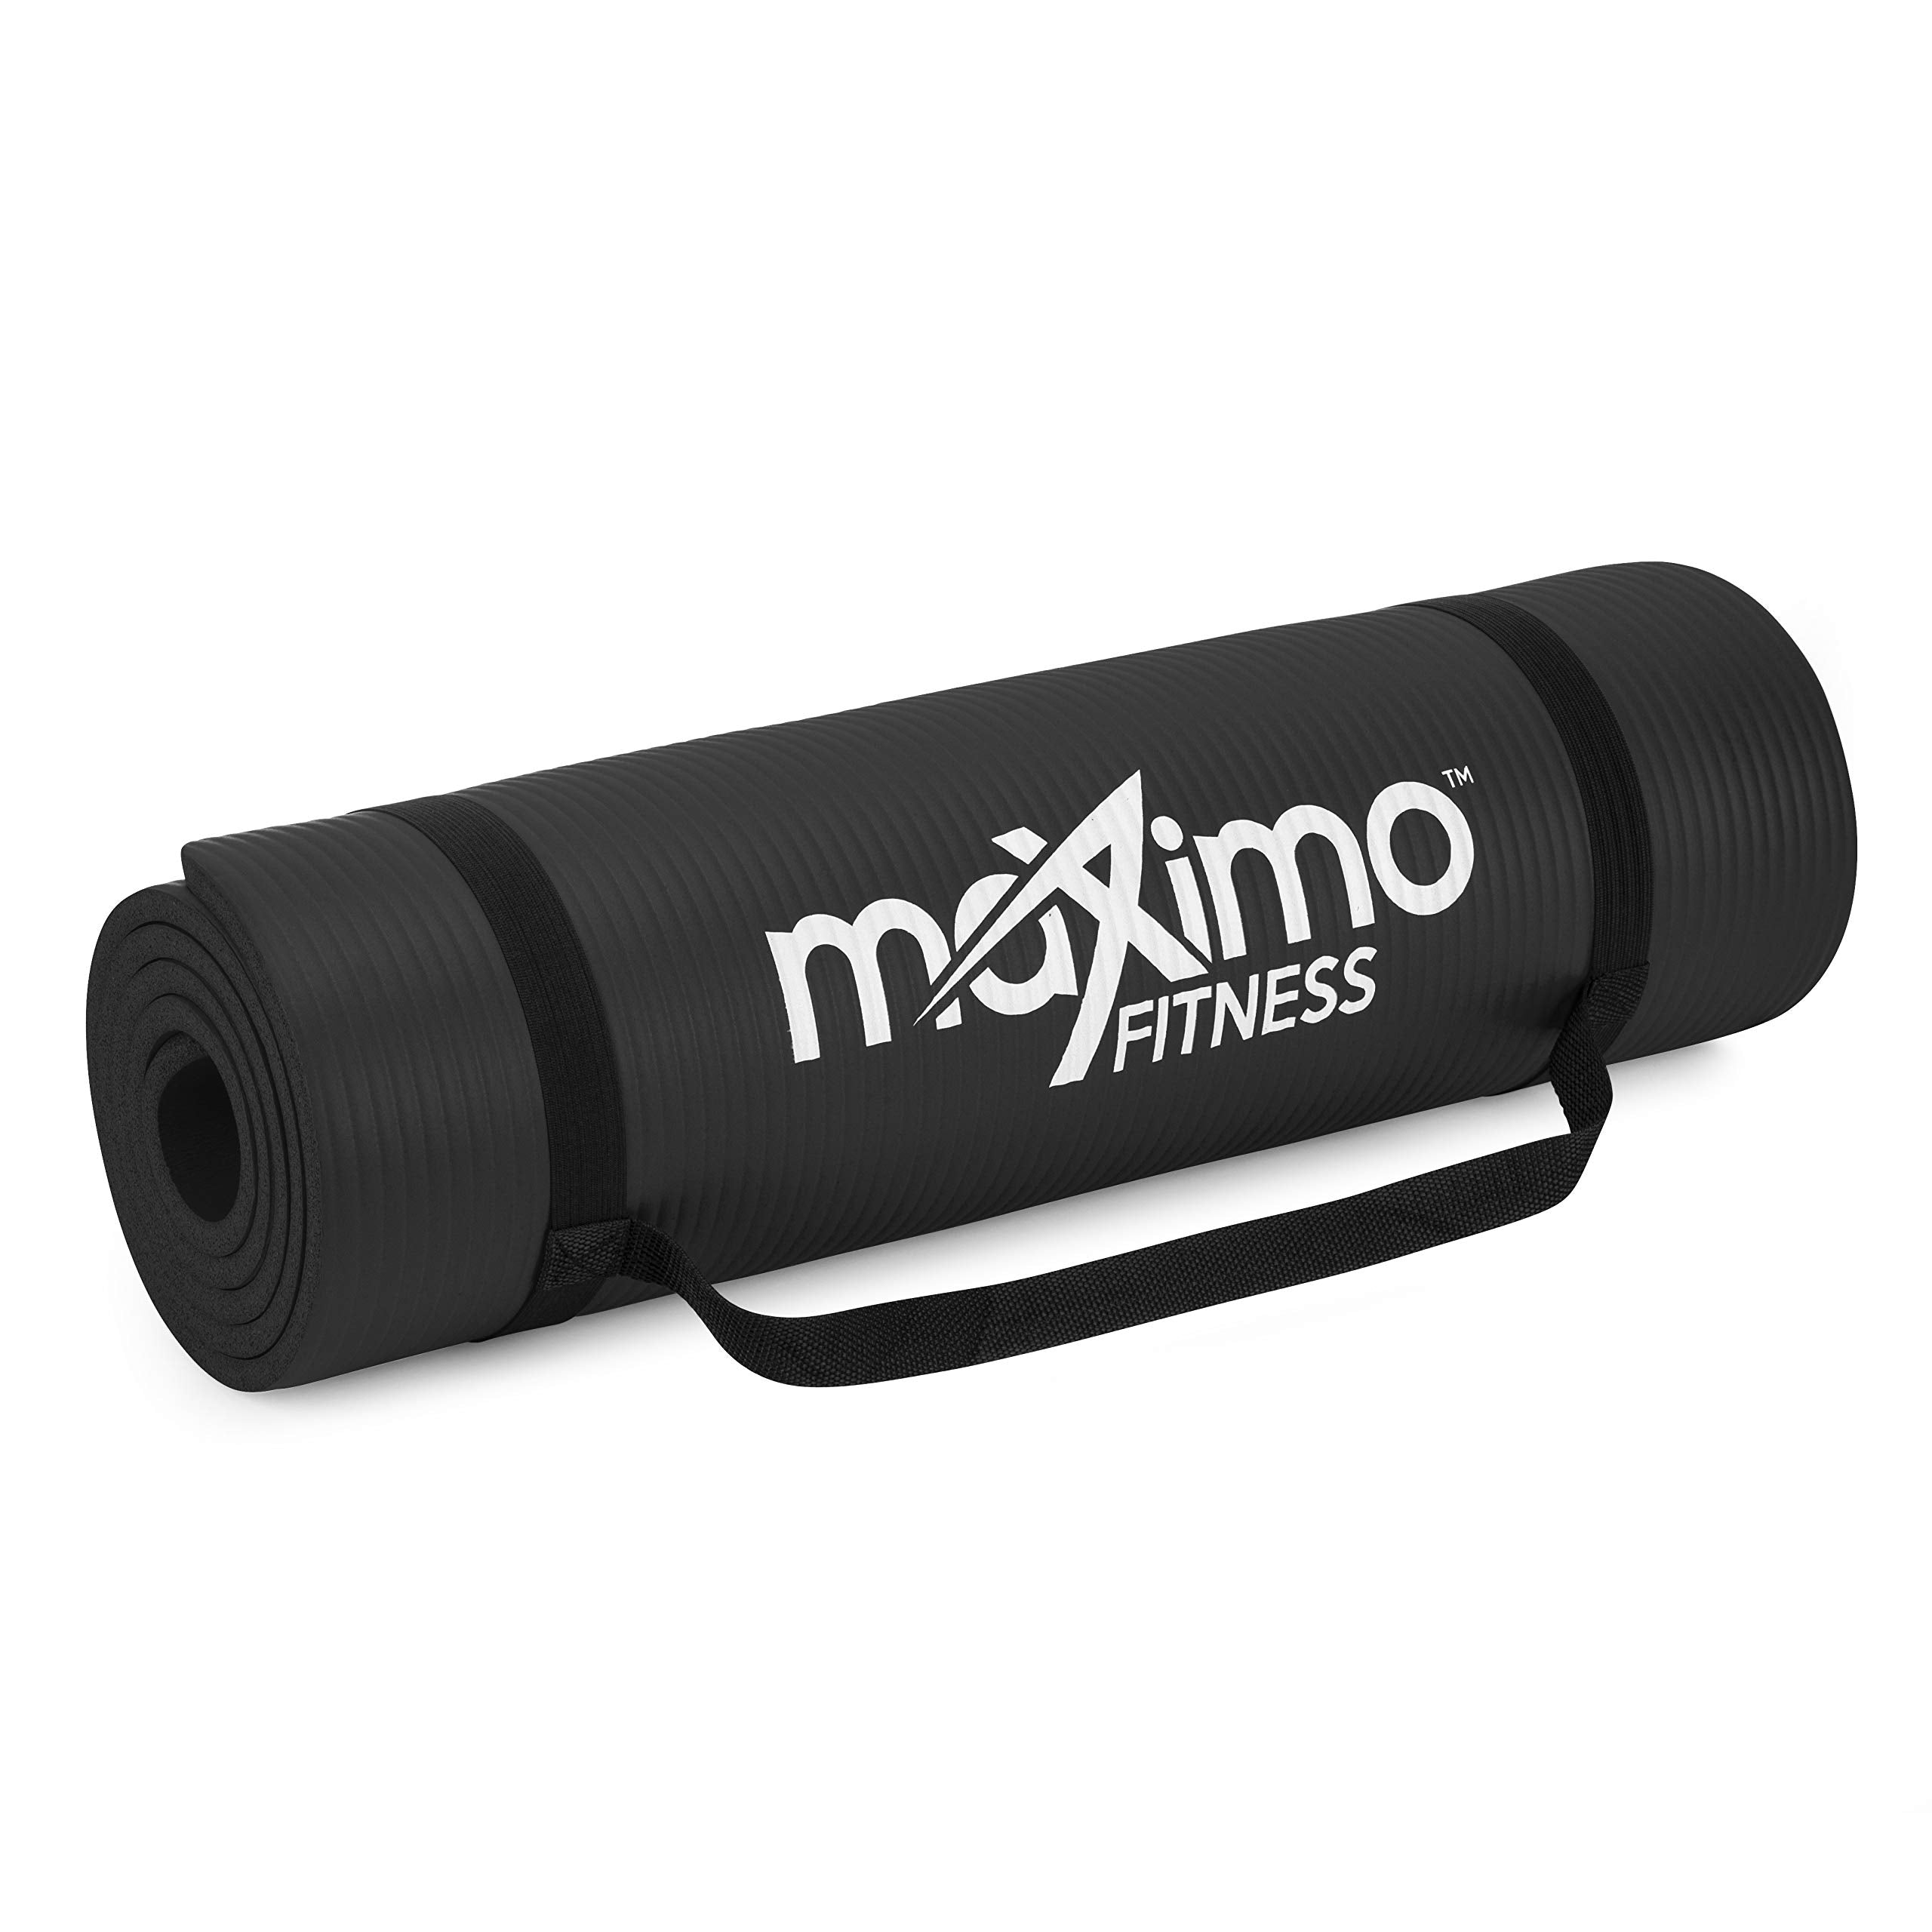 Maximo Exercise Mat, Yoga Mat Multi Purpose for Men, Women and Kids, 183cm x 60cm Extra Thick Ideal for Pilates, Sit Ups, Planks, Stretching, Push Ups Exercise, Non-Slip, Ideal for Home Gym Accessories